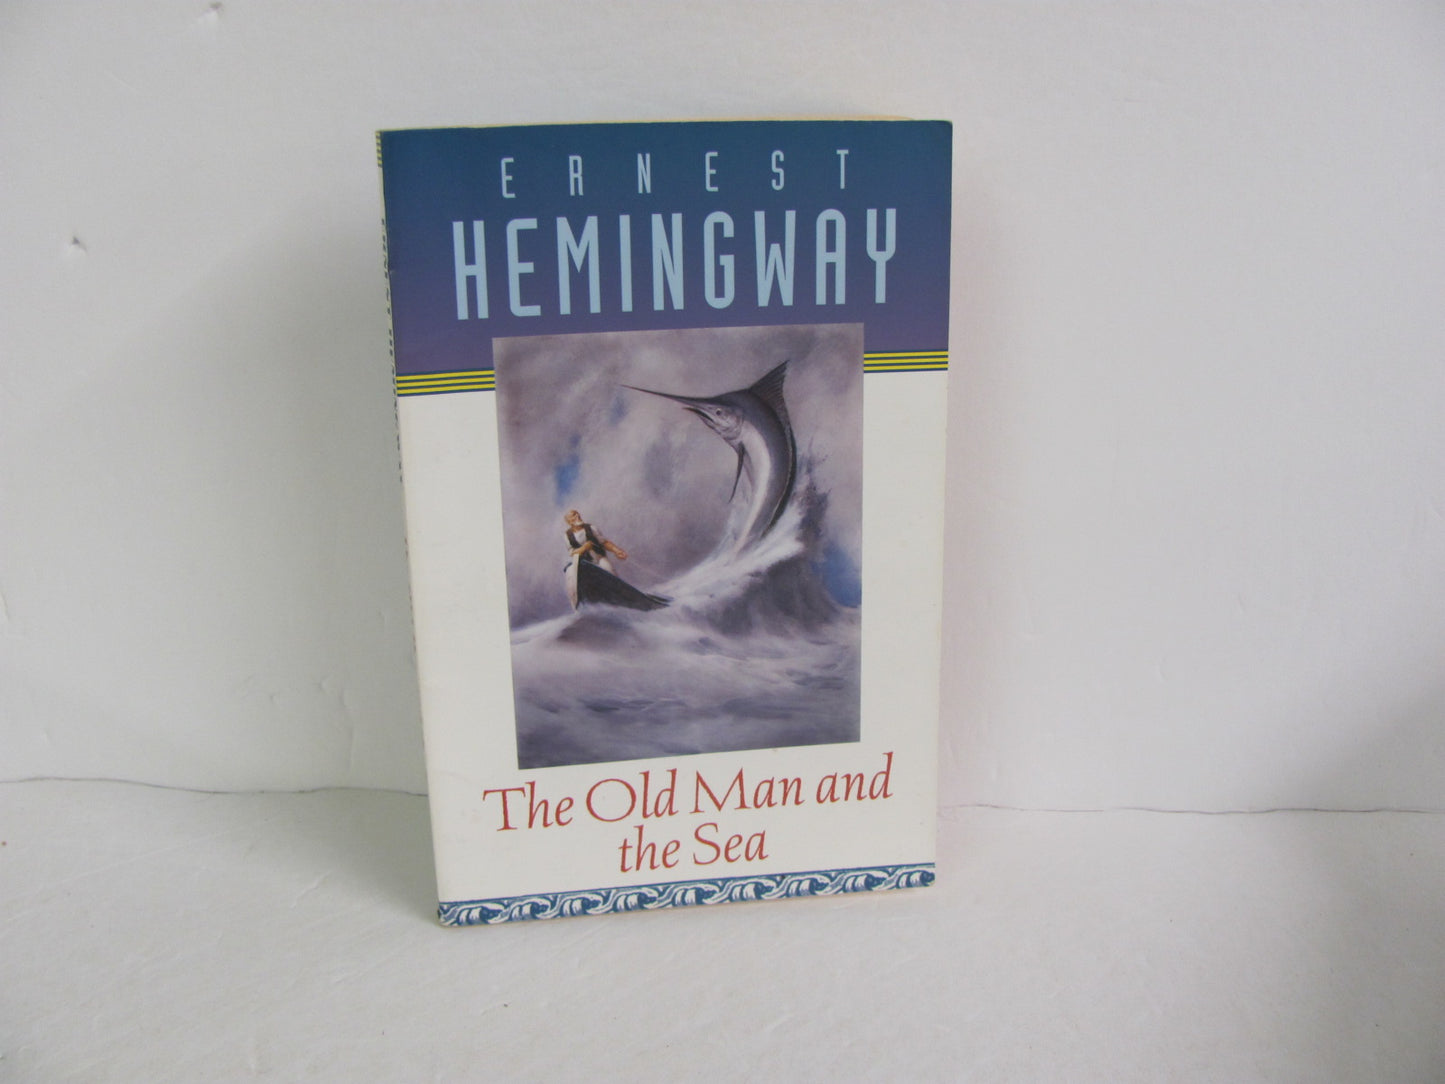 The Old Man and the Sea Scribner Pre-Owned Hemingway Fiction Books